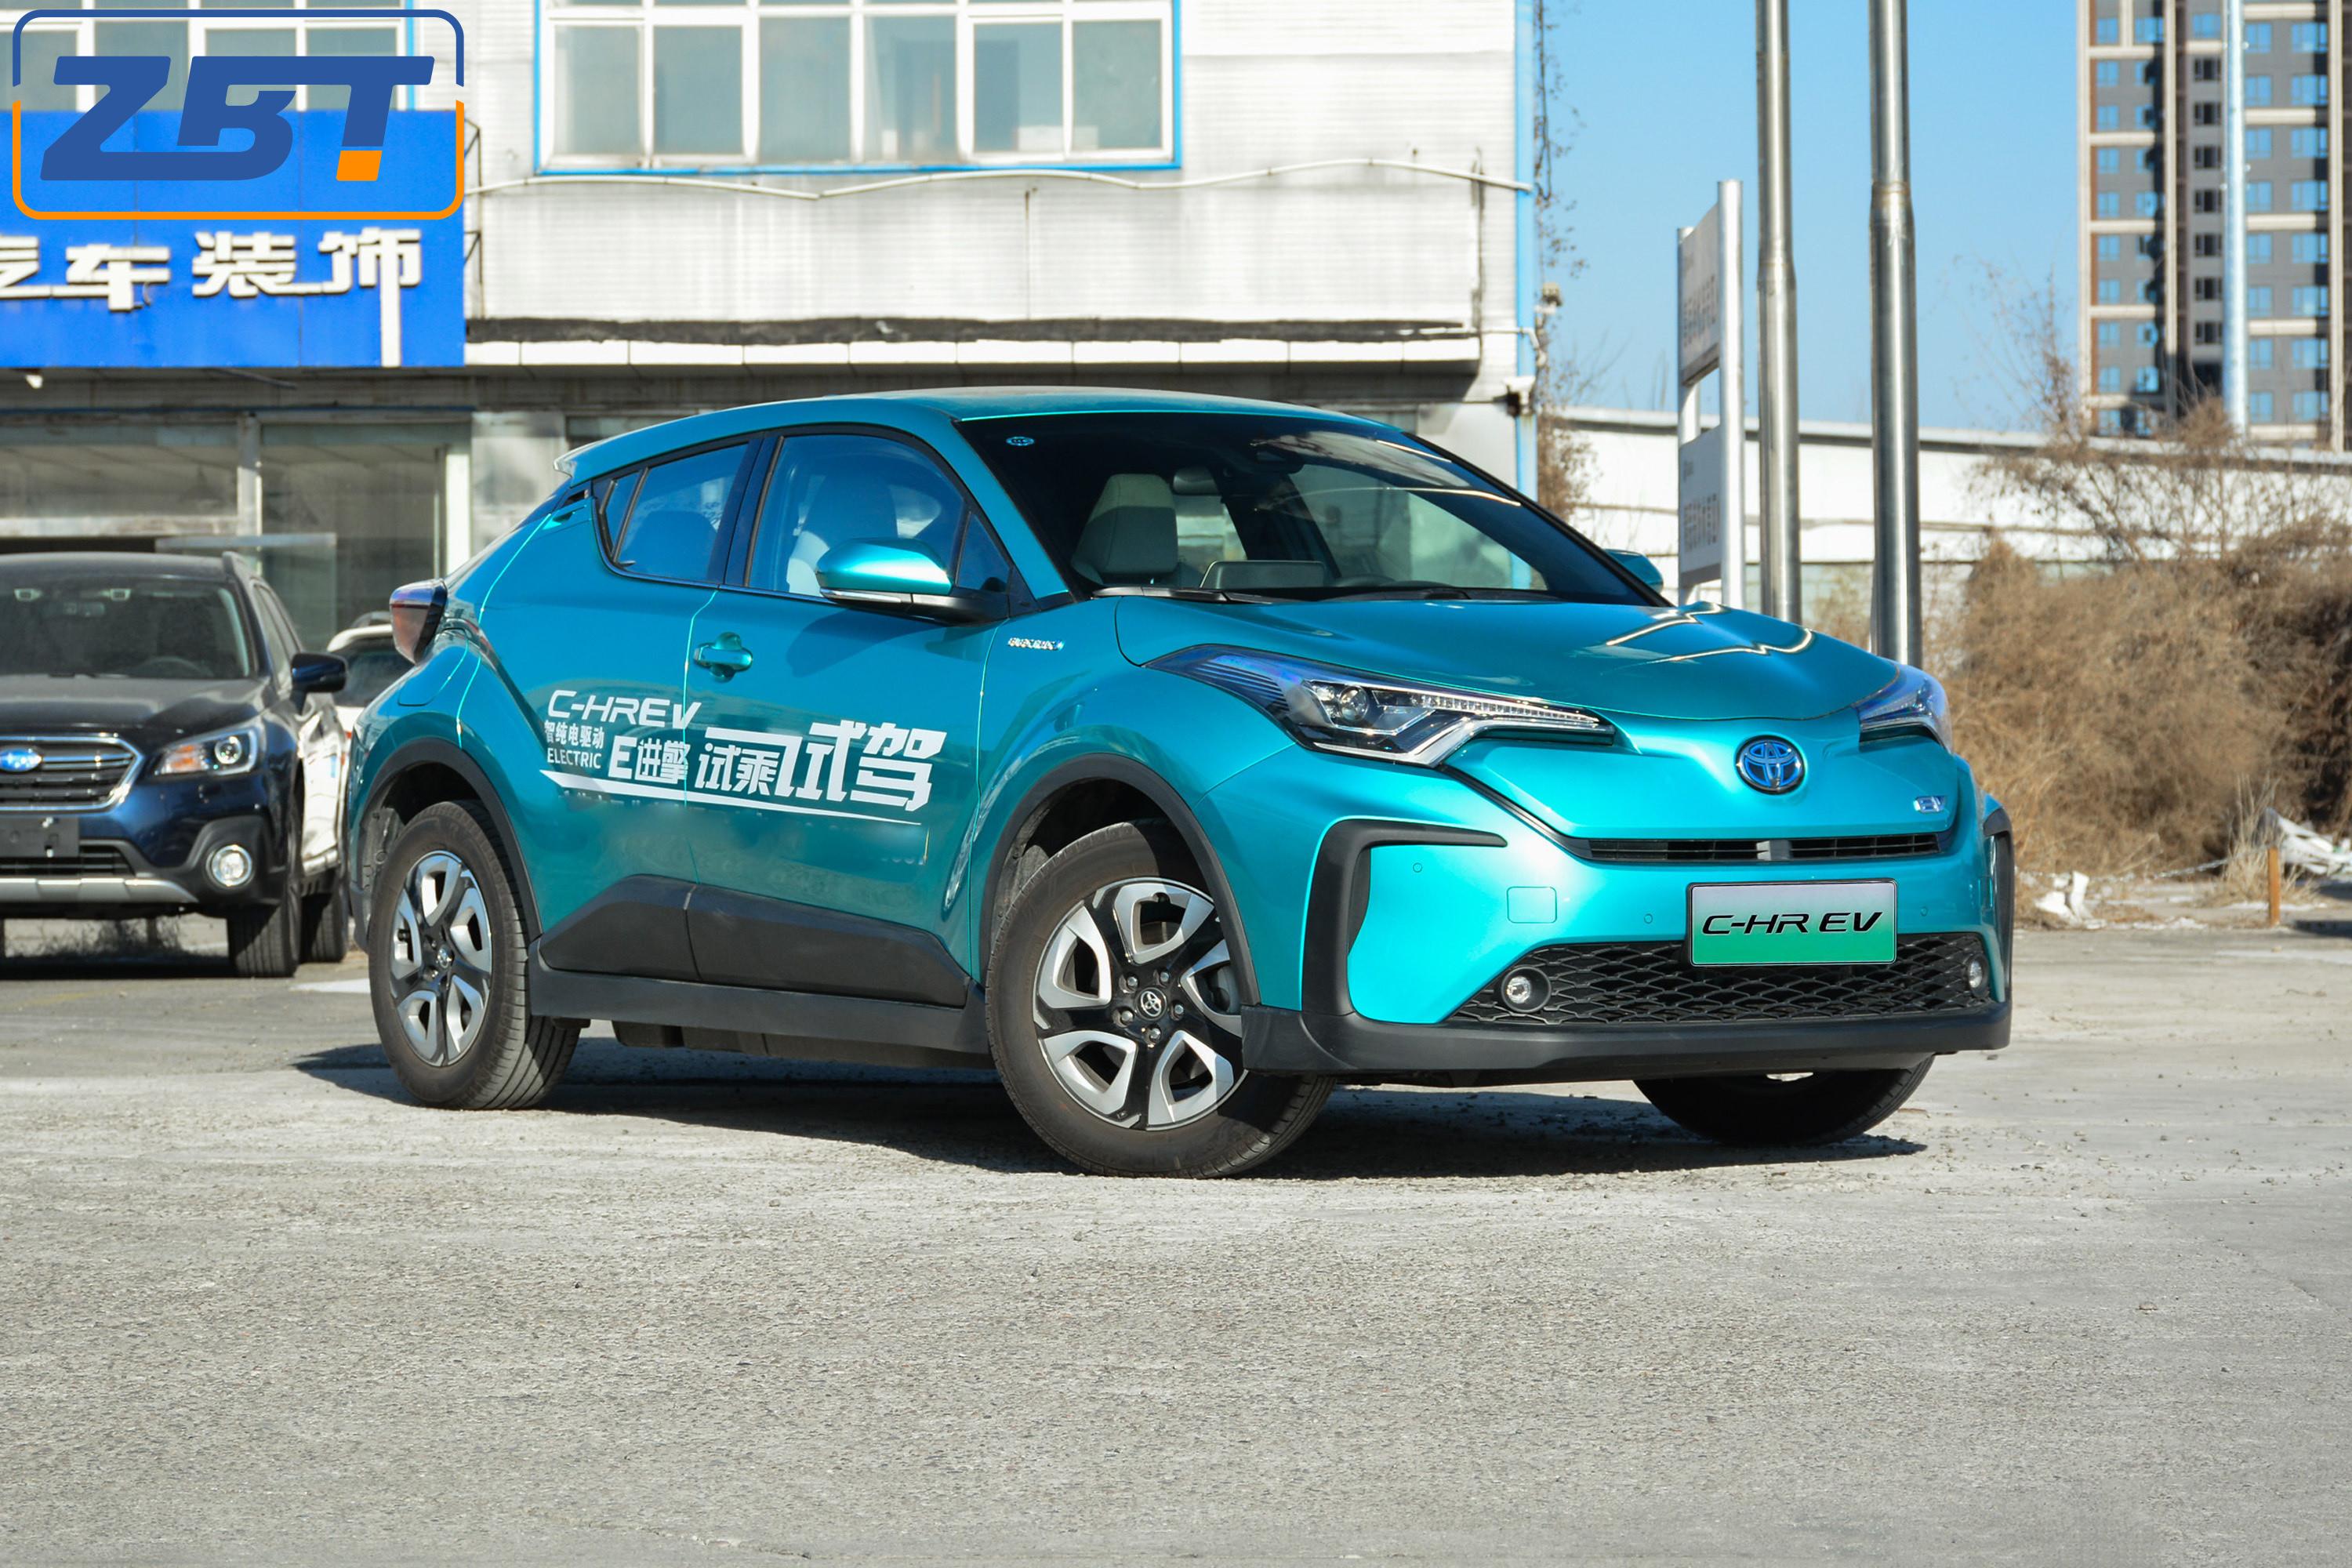 Sport Electric Vehicle Smart Luxury C-HR EV Electric Car Many Airbags PM2.5 Filter SUV with Front Rear Parking Radar